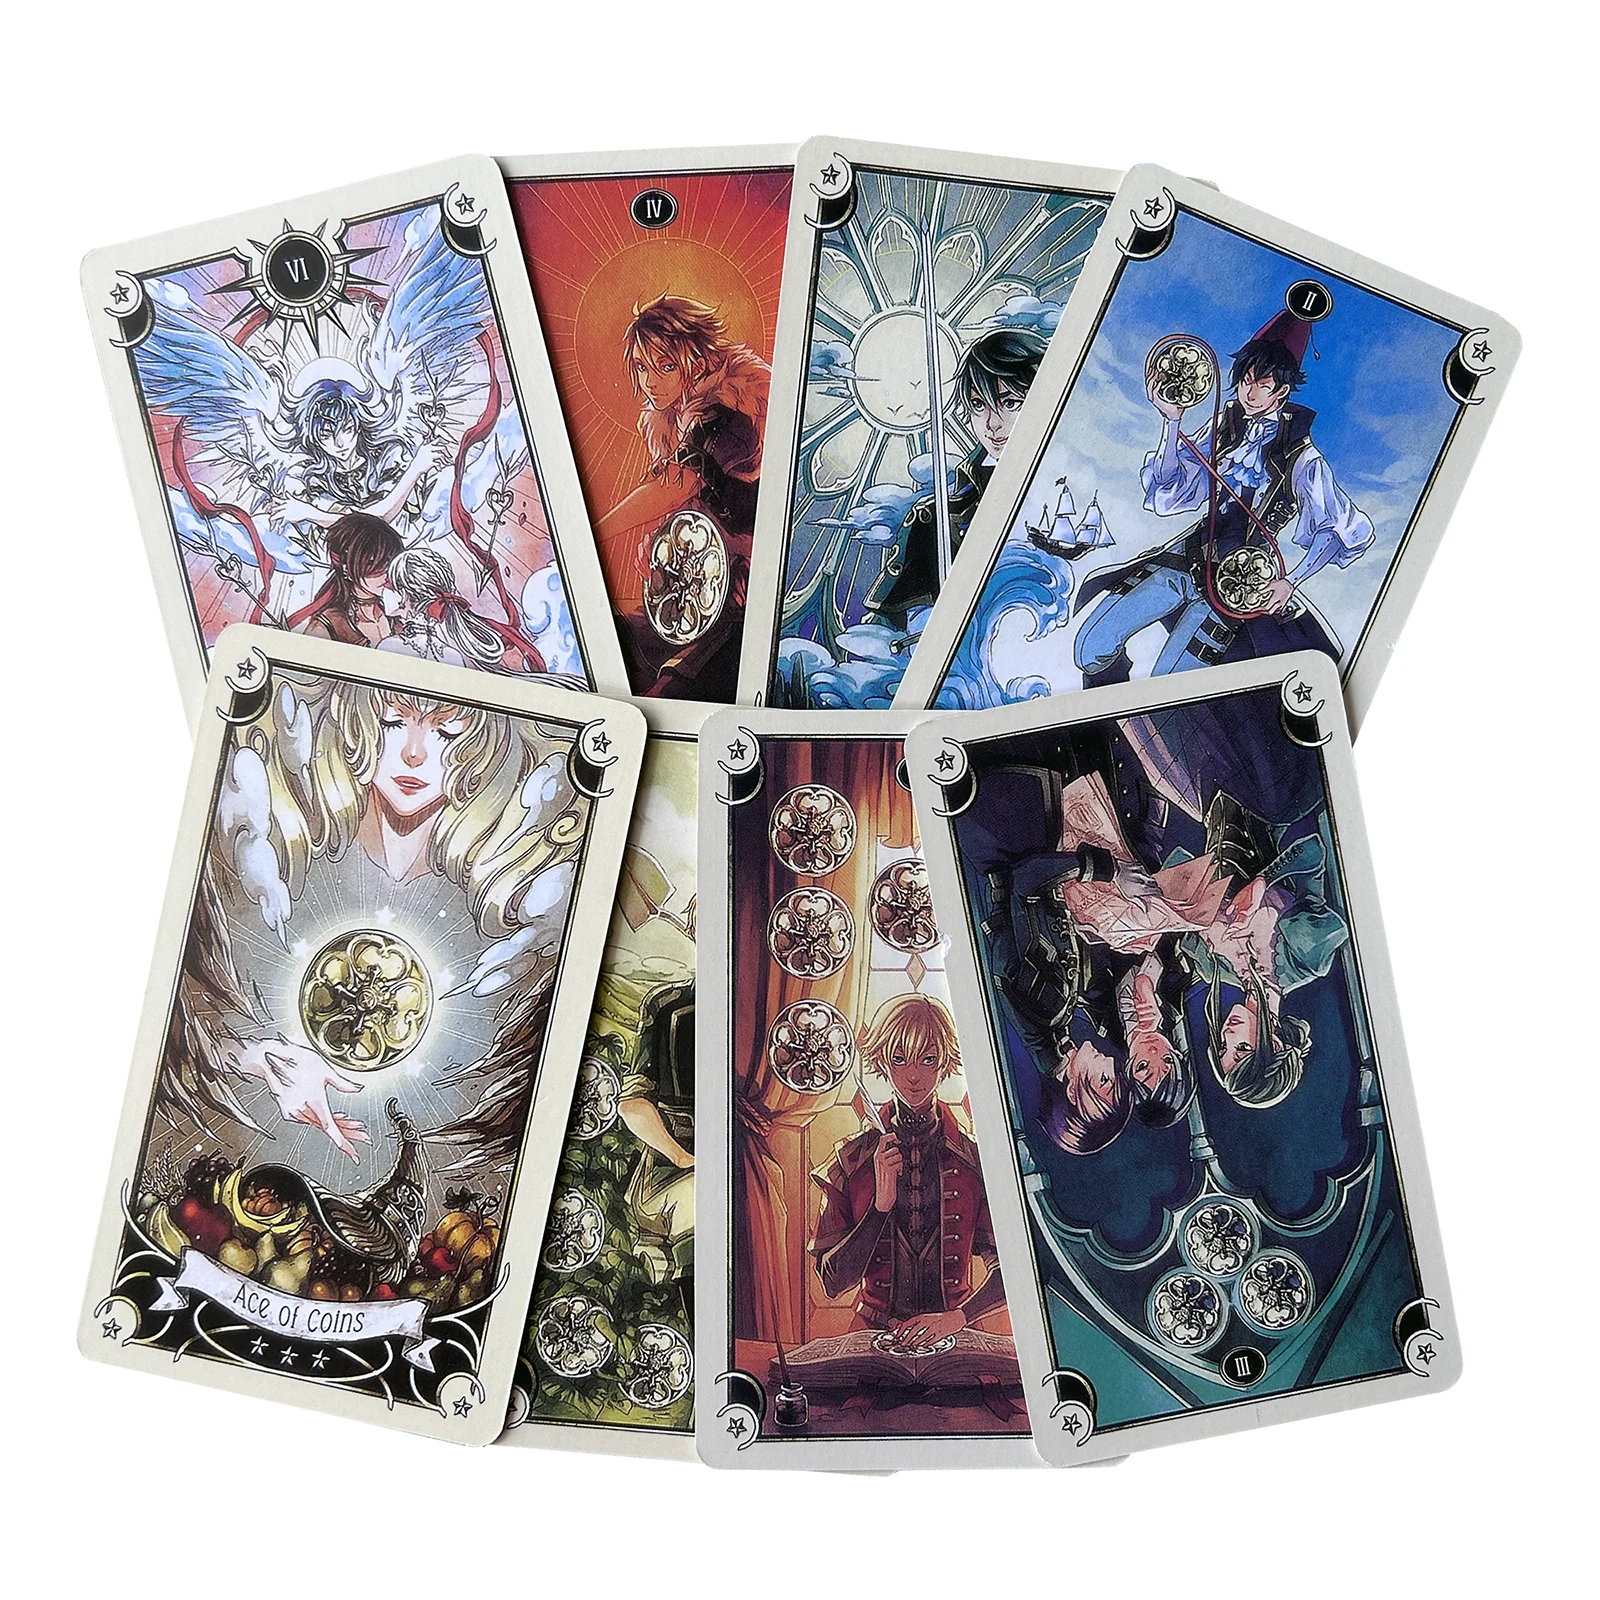 Hot Sell Tarot Cards 12x7 Board Game for Divination Personal Use Tarot Deck Party Games Full English Table Game Outdoor Camping. outdoor water sport stand up paddle board deck bag kayak paddle surf storage bag paddleboard bag summer rafting